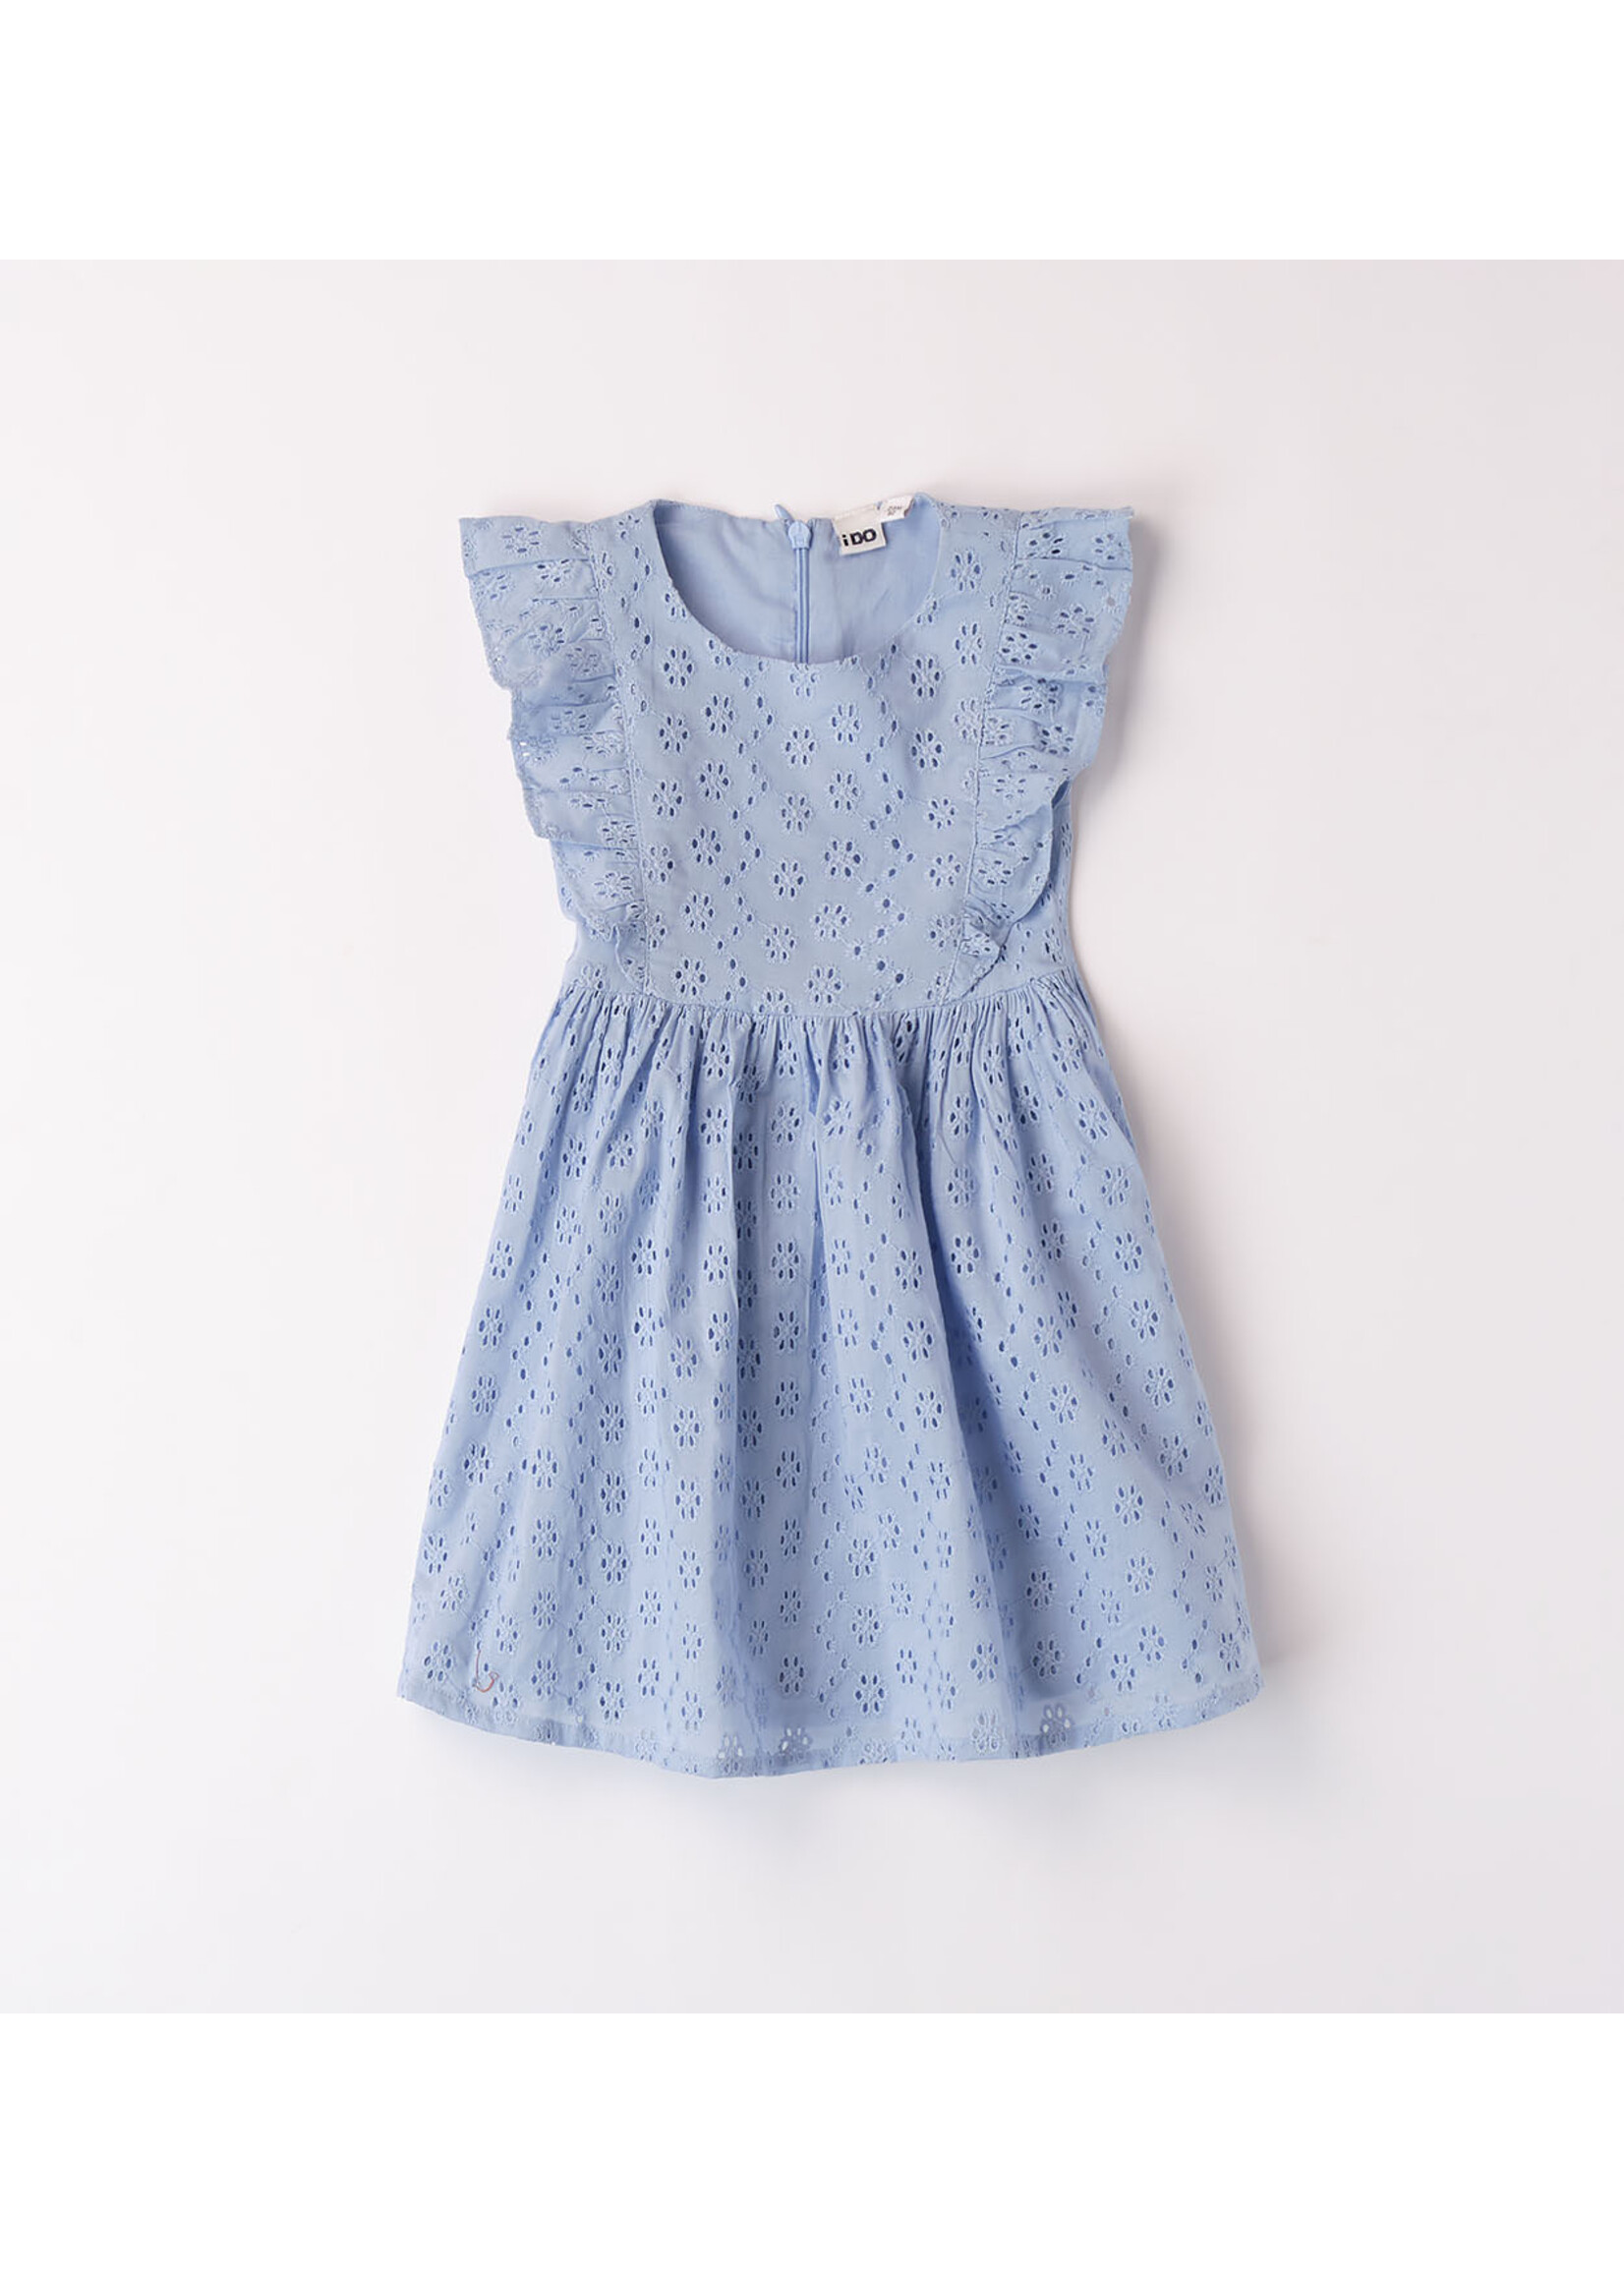 Ido 48318 WOVEN DRESS WITH SLEEVES BLUE